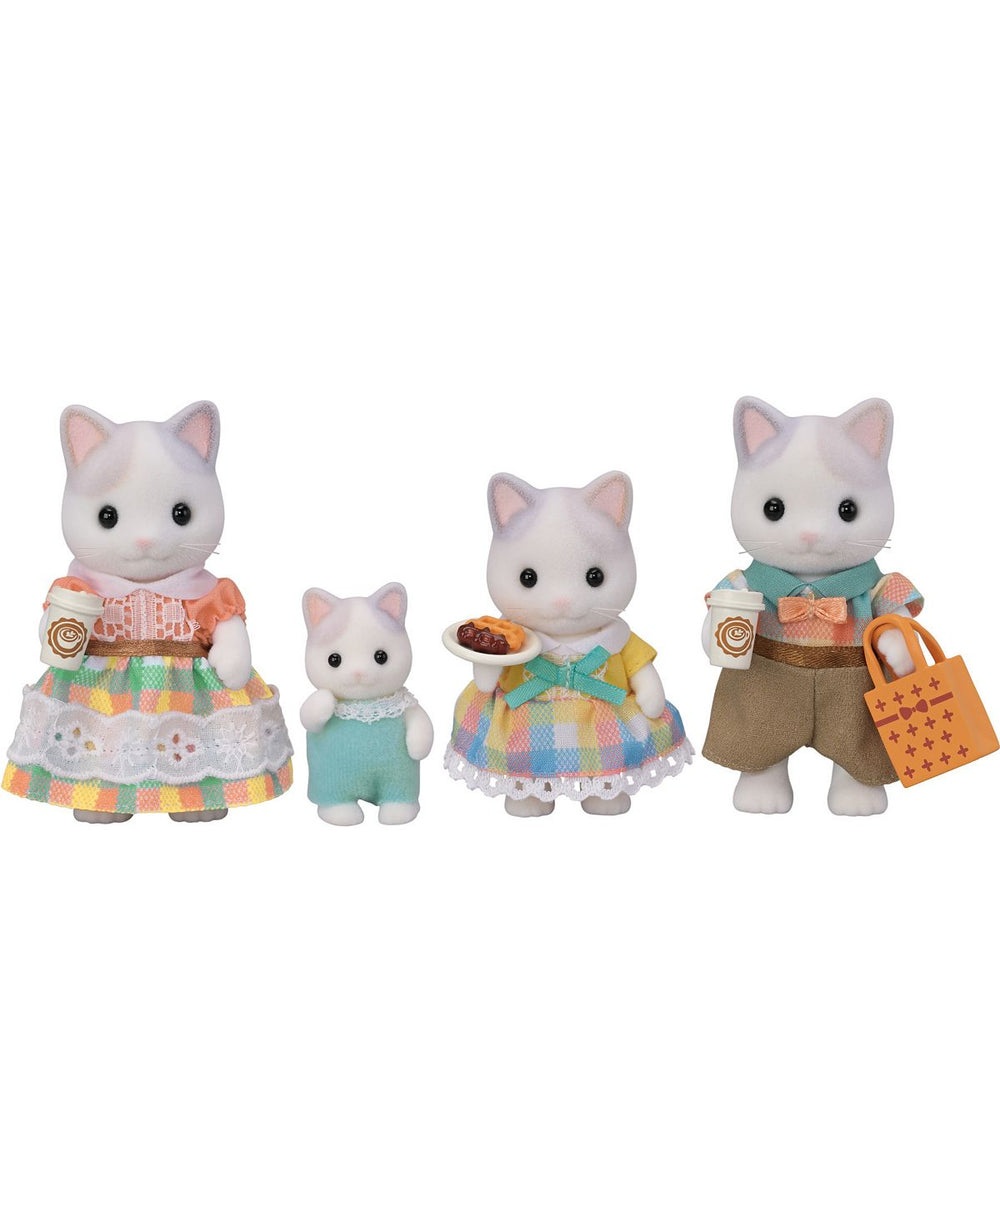 Calico Critters - Latte Cat Family Collectable Doll Figures, Set of 4